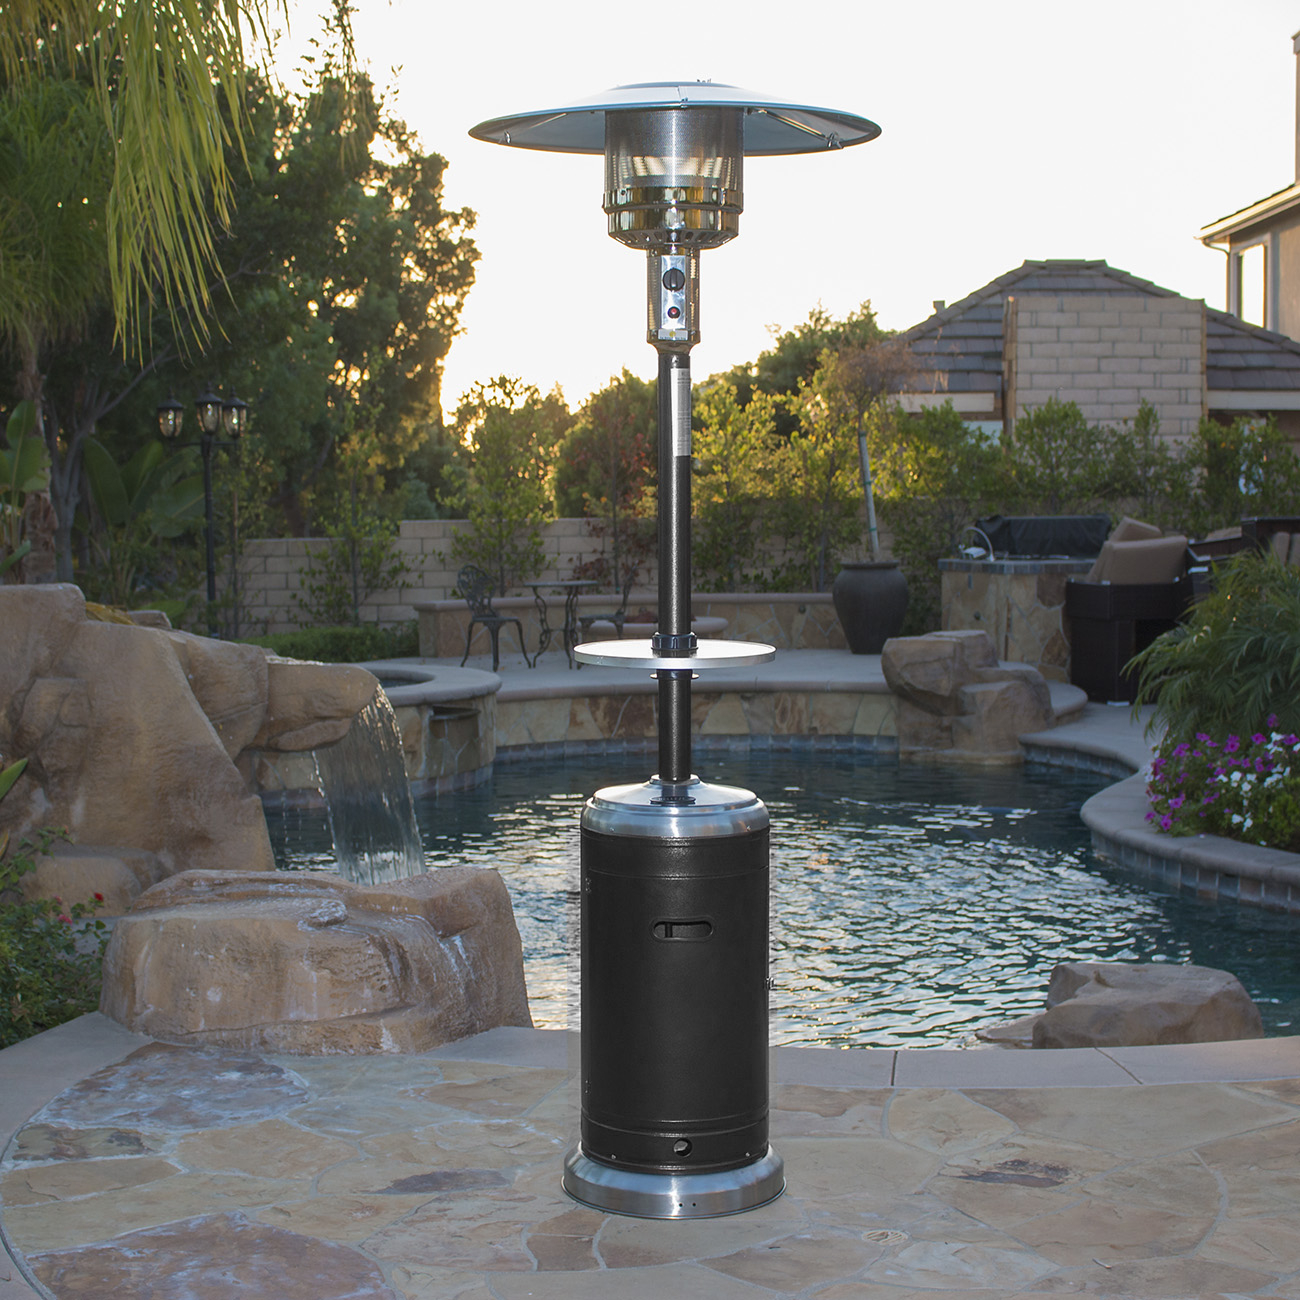 Details About 48000 Btu Black And Stainless Steel Full Size Propane Gas Patio Heater W Table with regard to measurements 1300 X 1300